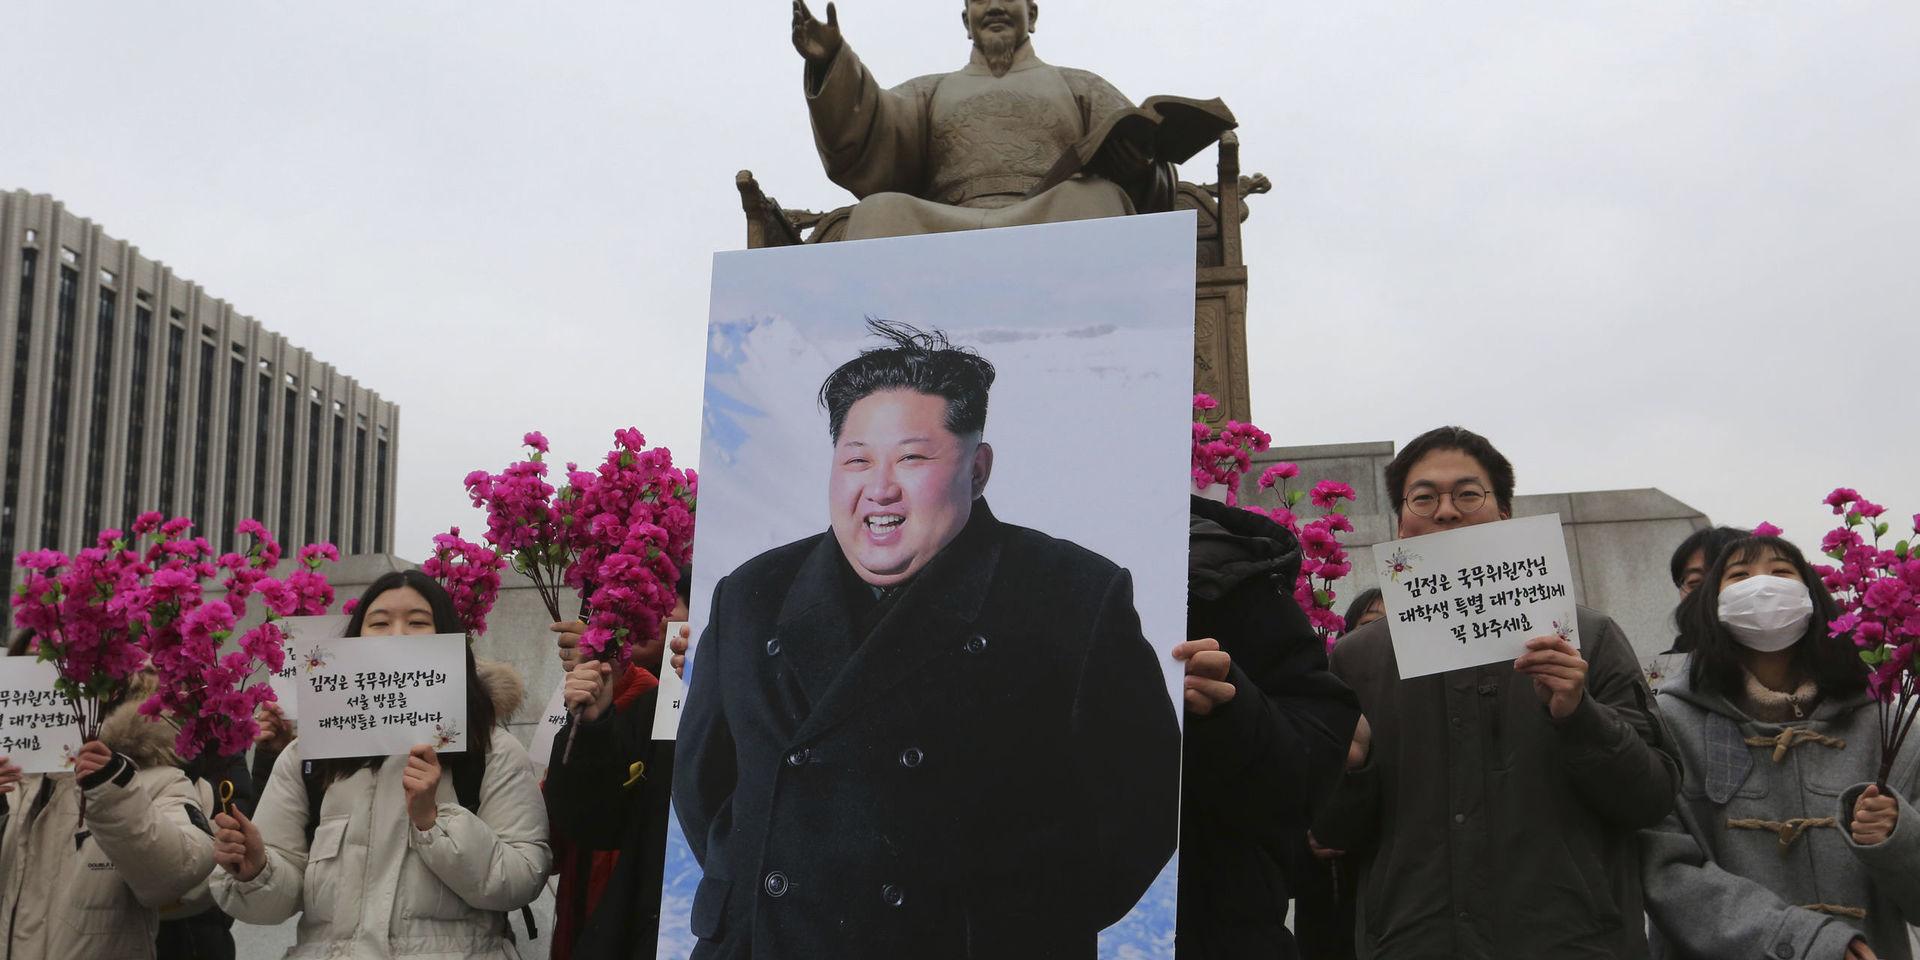 South Korean college students stand with a portrait of North Korean leader Kim Jong Un during a rally to welcome his possible visit to South Korea, in Seoul, South Korea, Thursday, Jan. 31, 2019. Secretary of State Mike Pompeo says he is sending a team &quot;someplace in Asia&quot; to set up a second summit between President Donald Trump and North Korean leader Kim Jong Un by the end of February. The signs read &quot; We welcome North Korean leader Kim Jong Un&apos;s visit.&quot; (AP Photo/Ahn Young-joon)